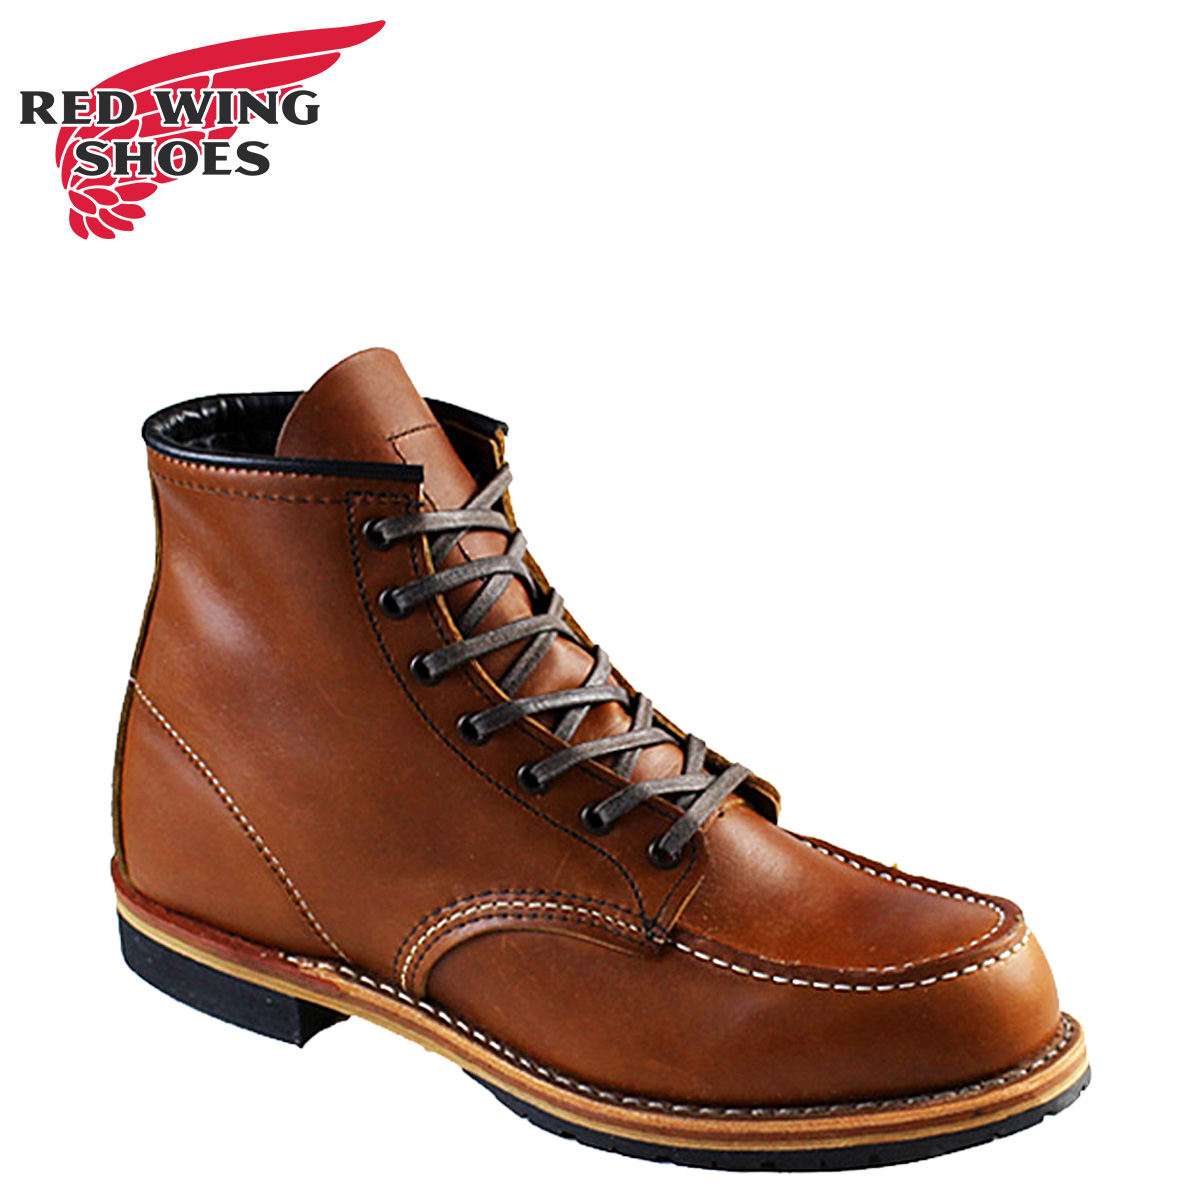 red wing beckman moc toe